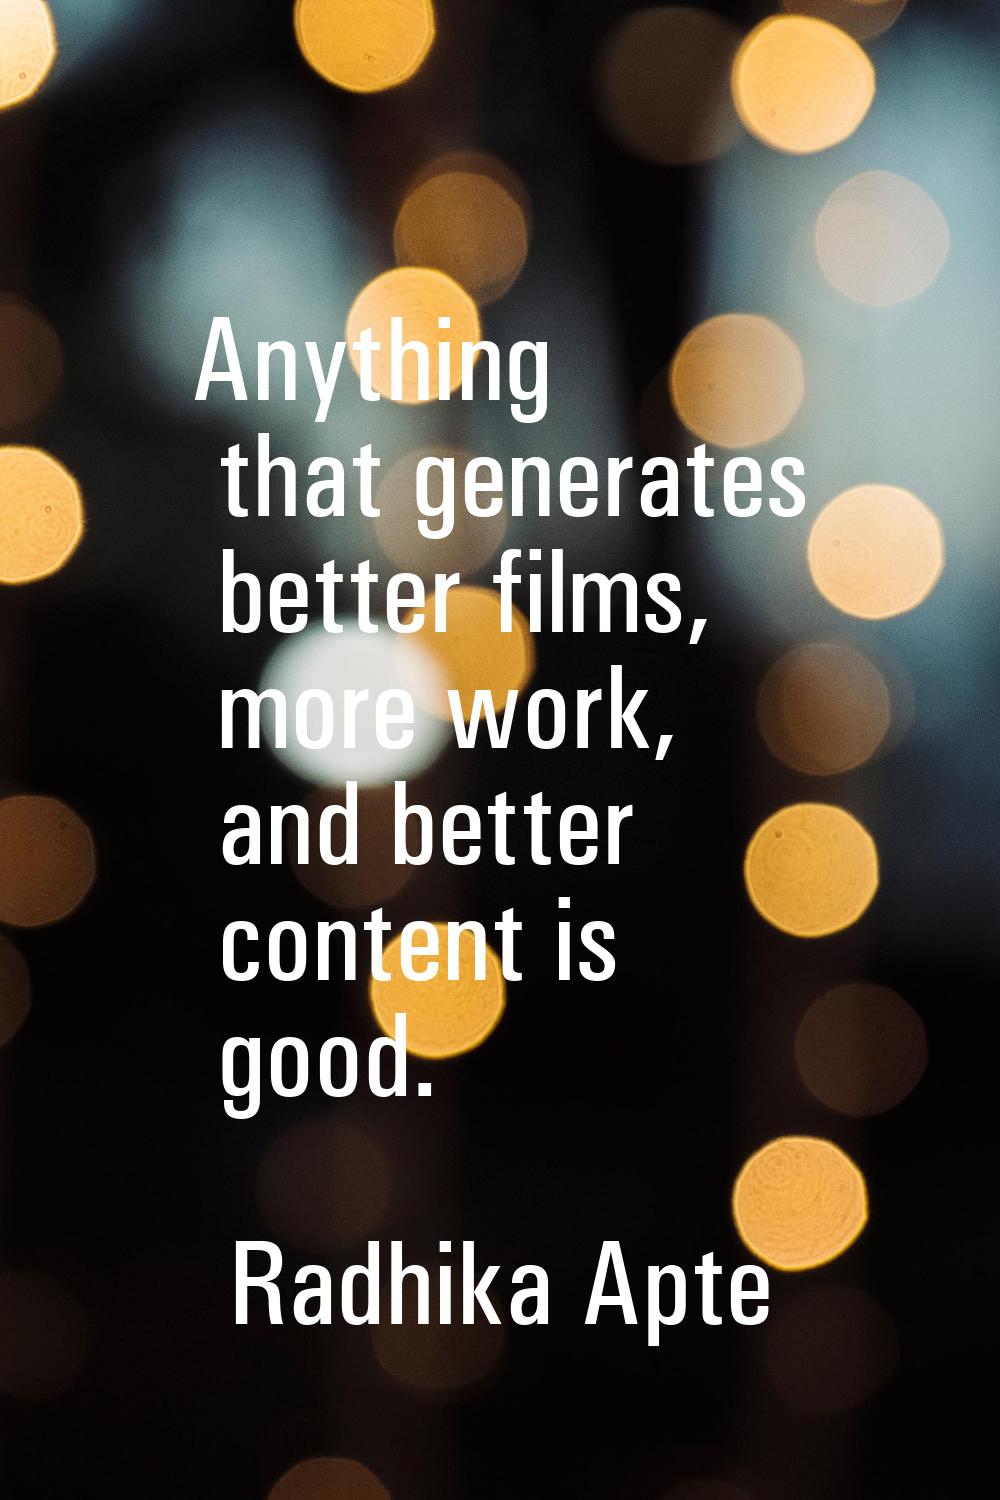 Anything that generates better films, more work, and better content is good.